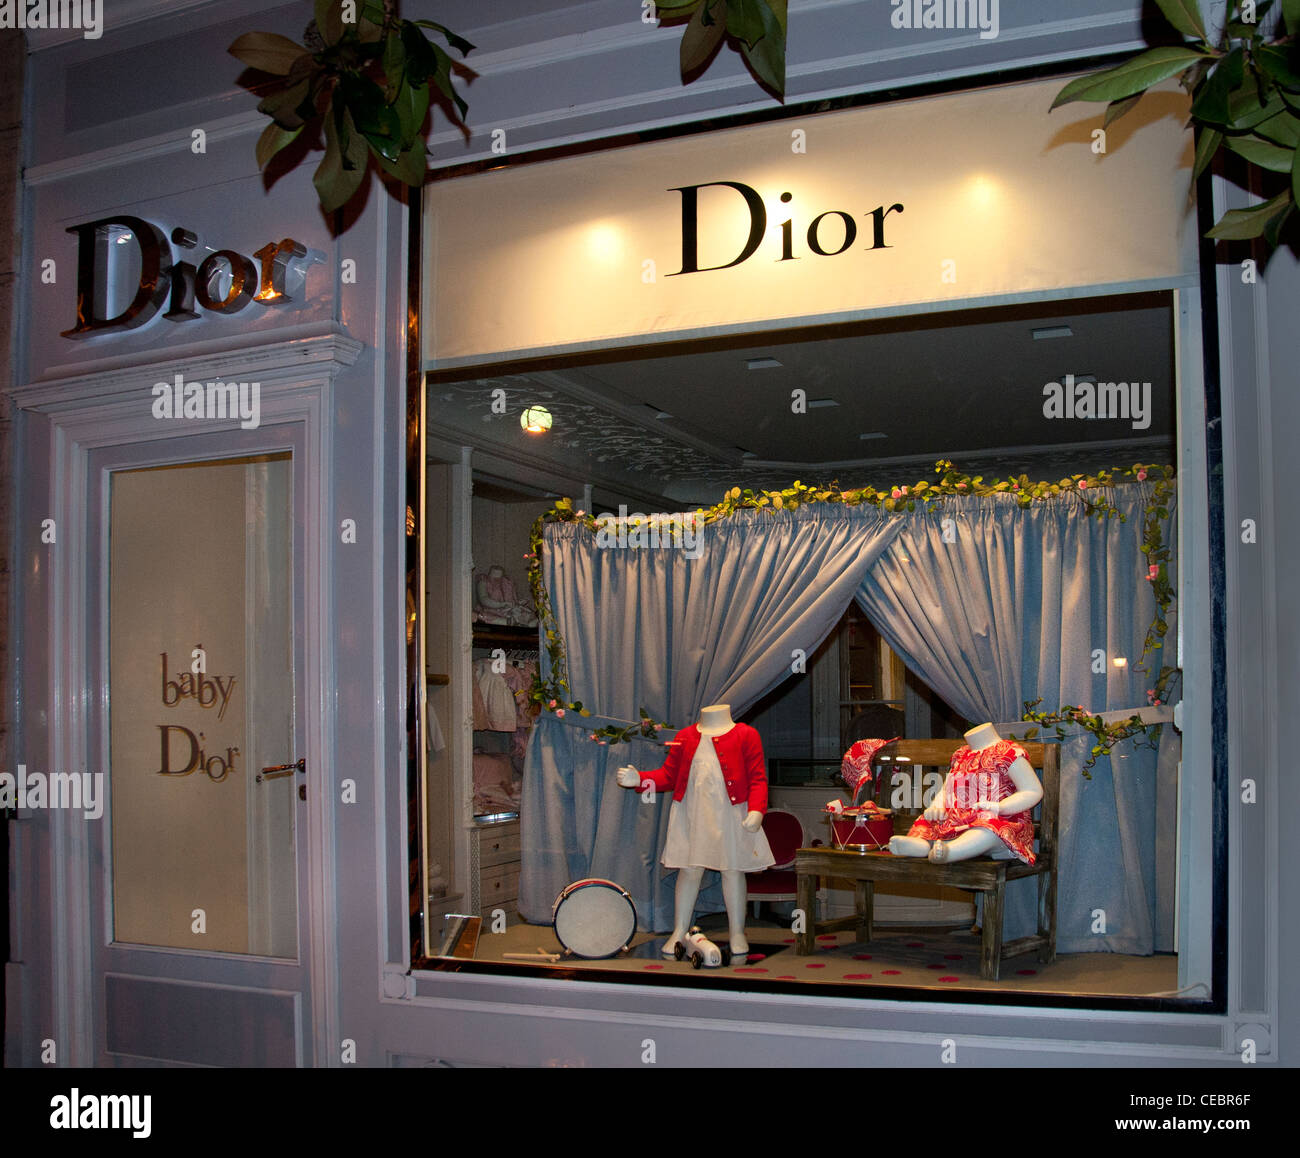 baby dior france